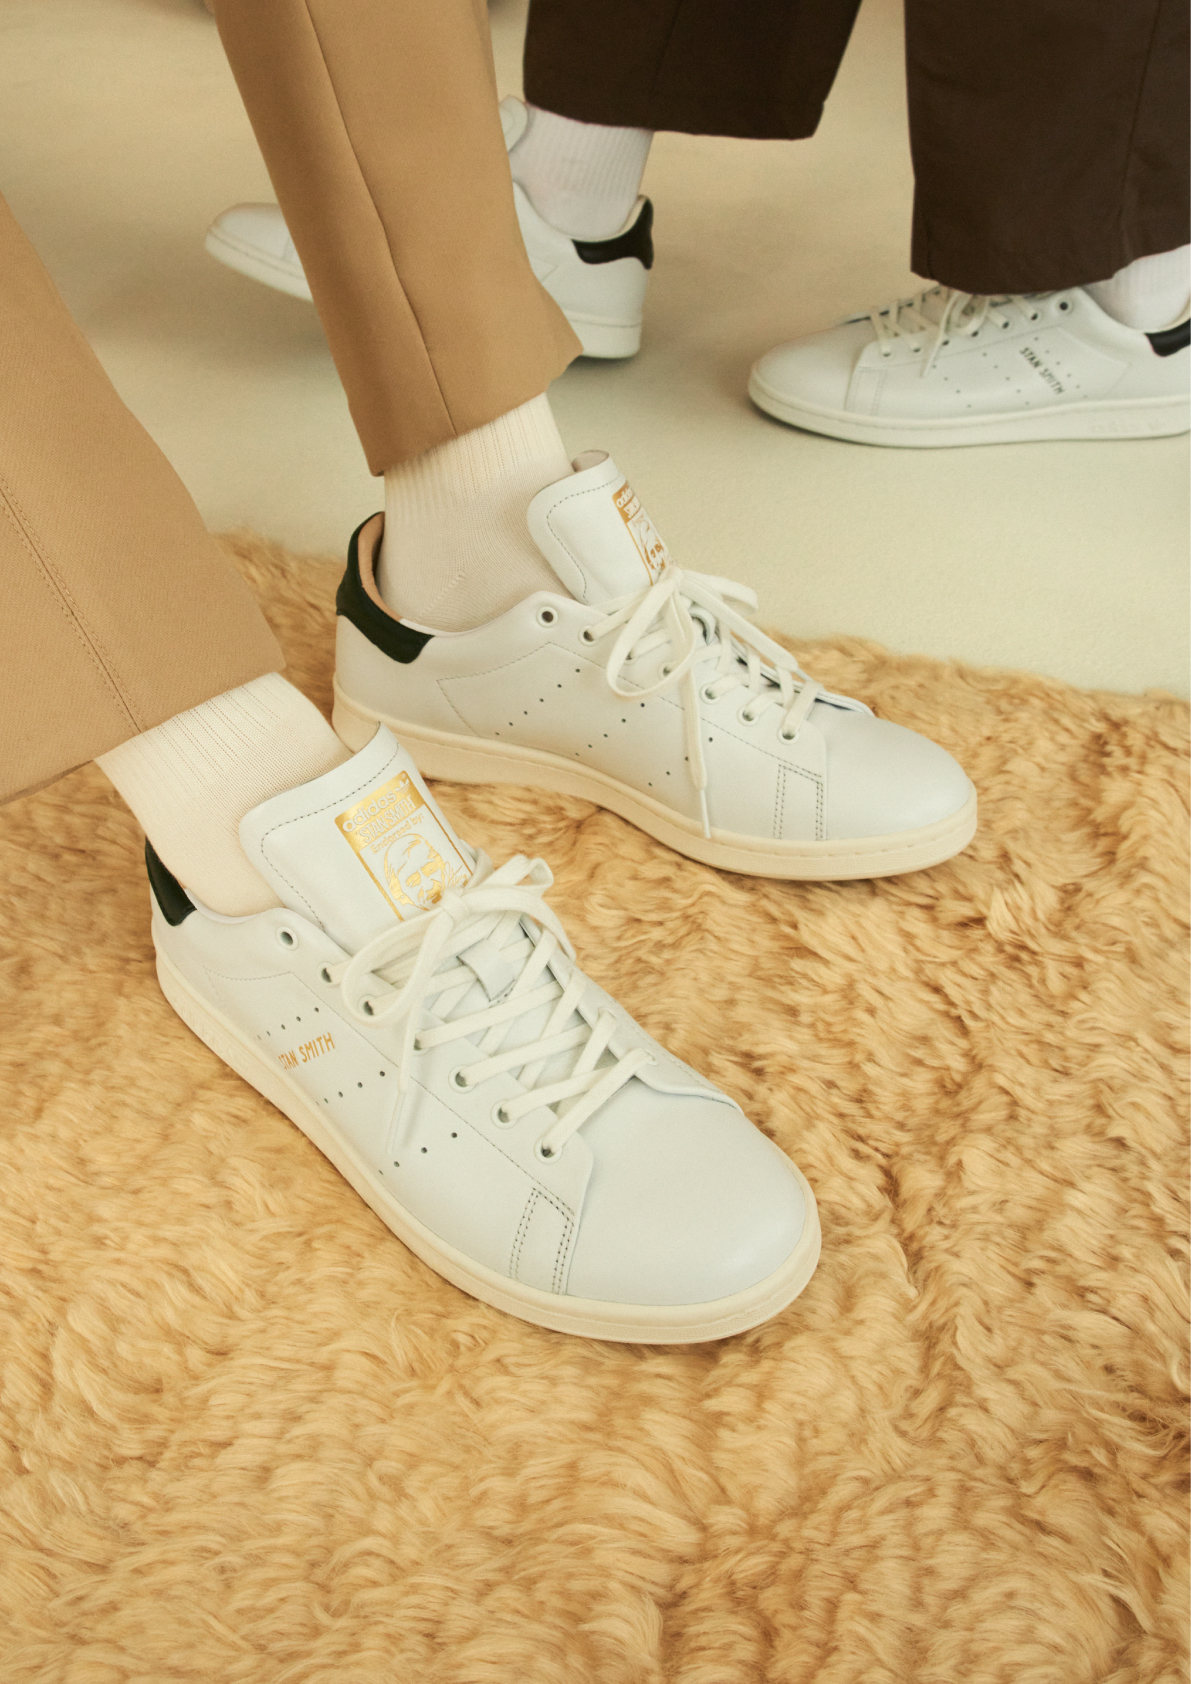 STAN SMITH LUX, a luxury update of Adidas' classic Stan Smith, is